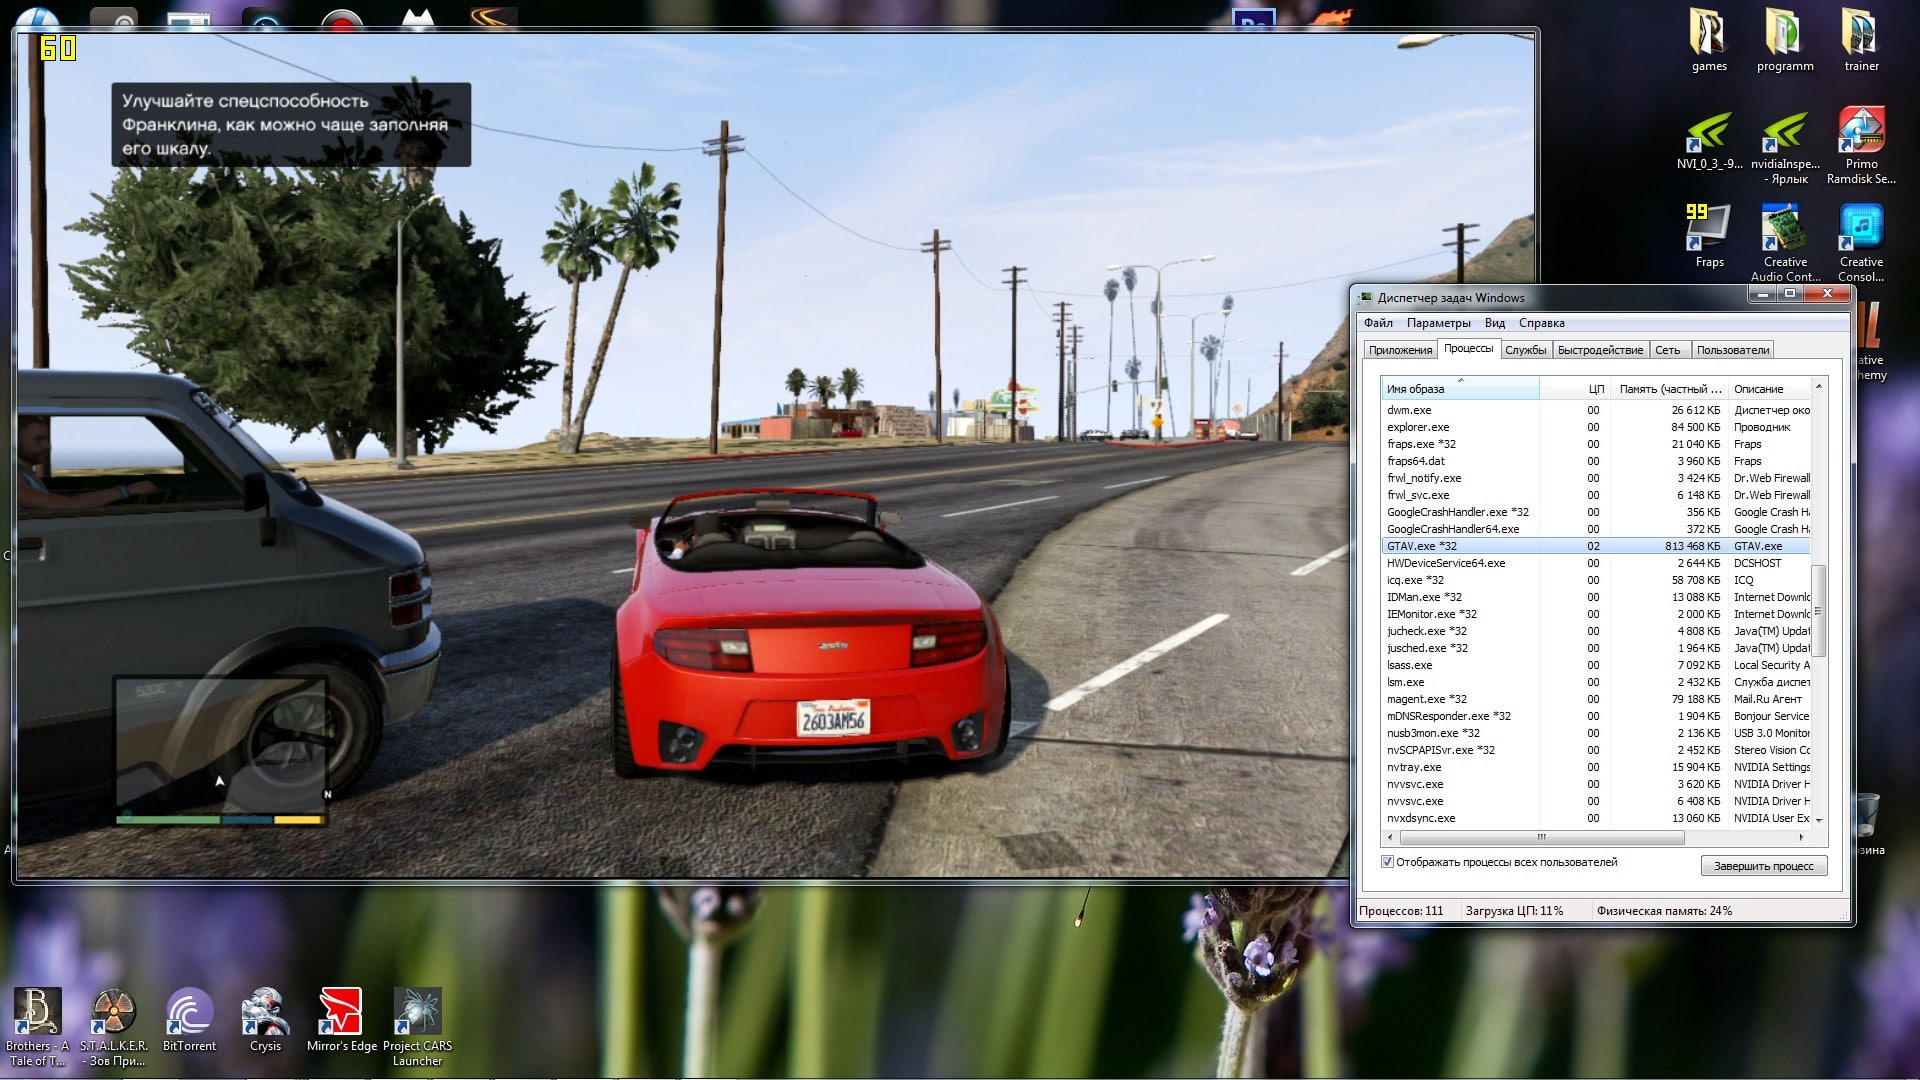 gta 5 pc online differences